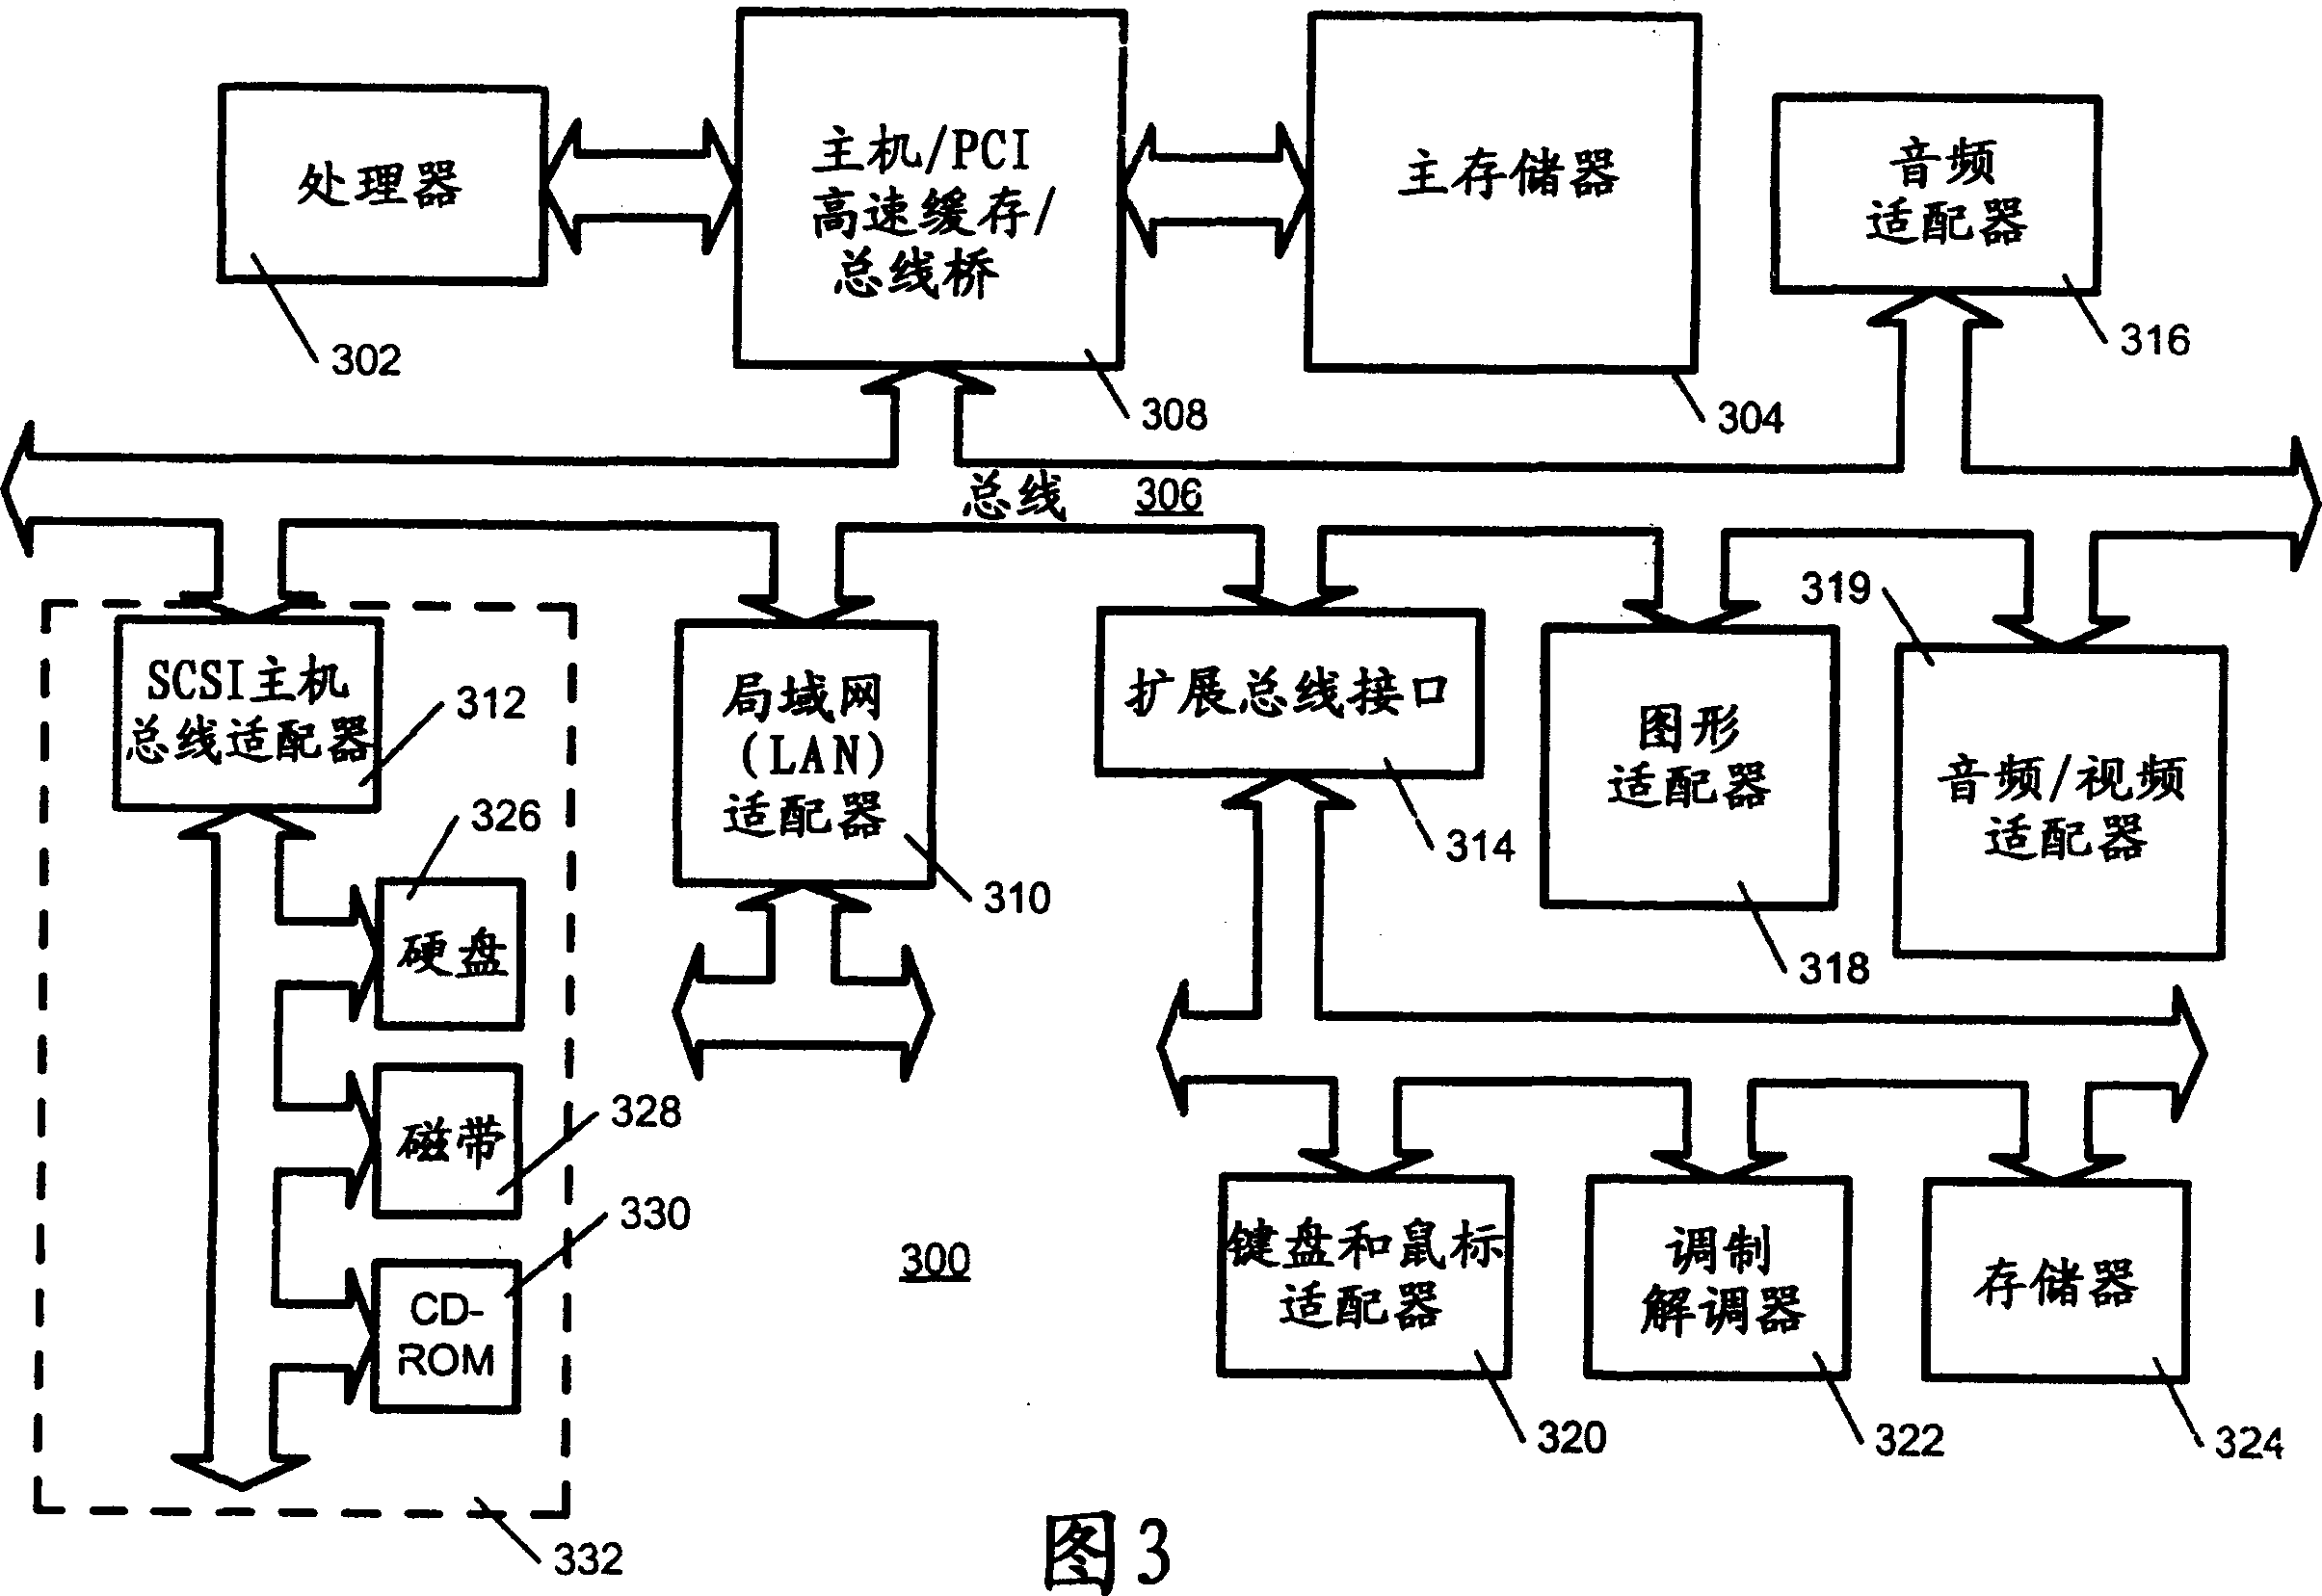 Apparatus and method for conducting load balance to multi-processor system